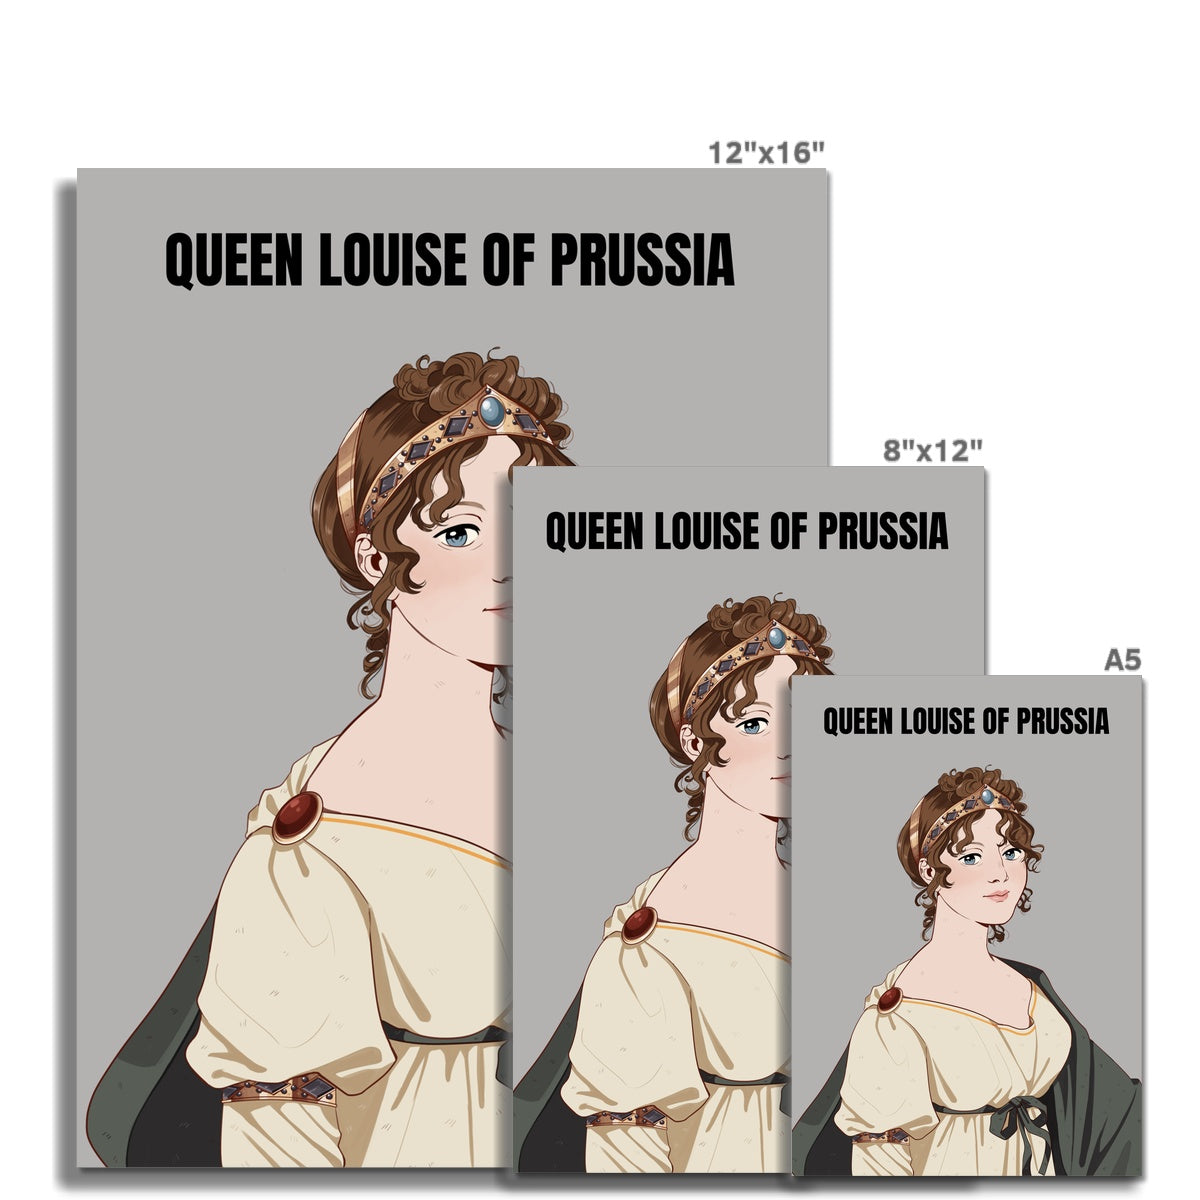 Queen Louise of Prussia Manga Style Art Print - Napoleonic Impressions